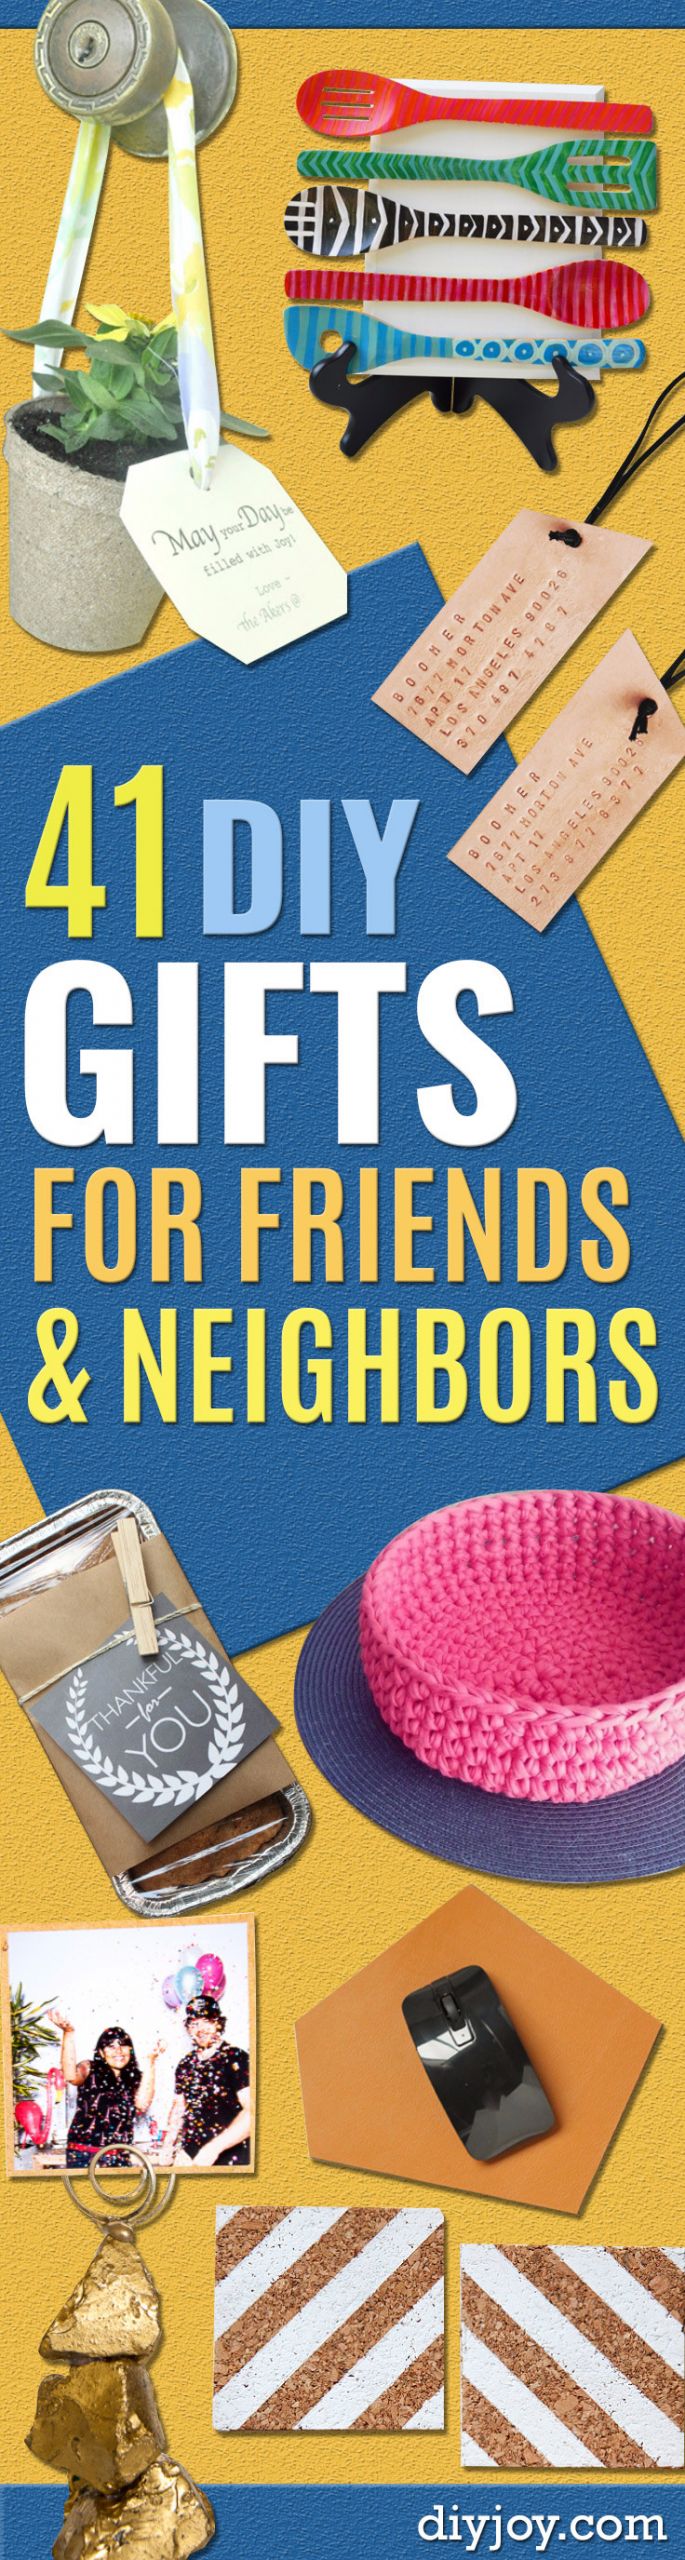 DIY Gifts For Best Friends
 41 Best Gifts To Make for Friends and Neighbors